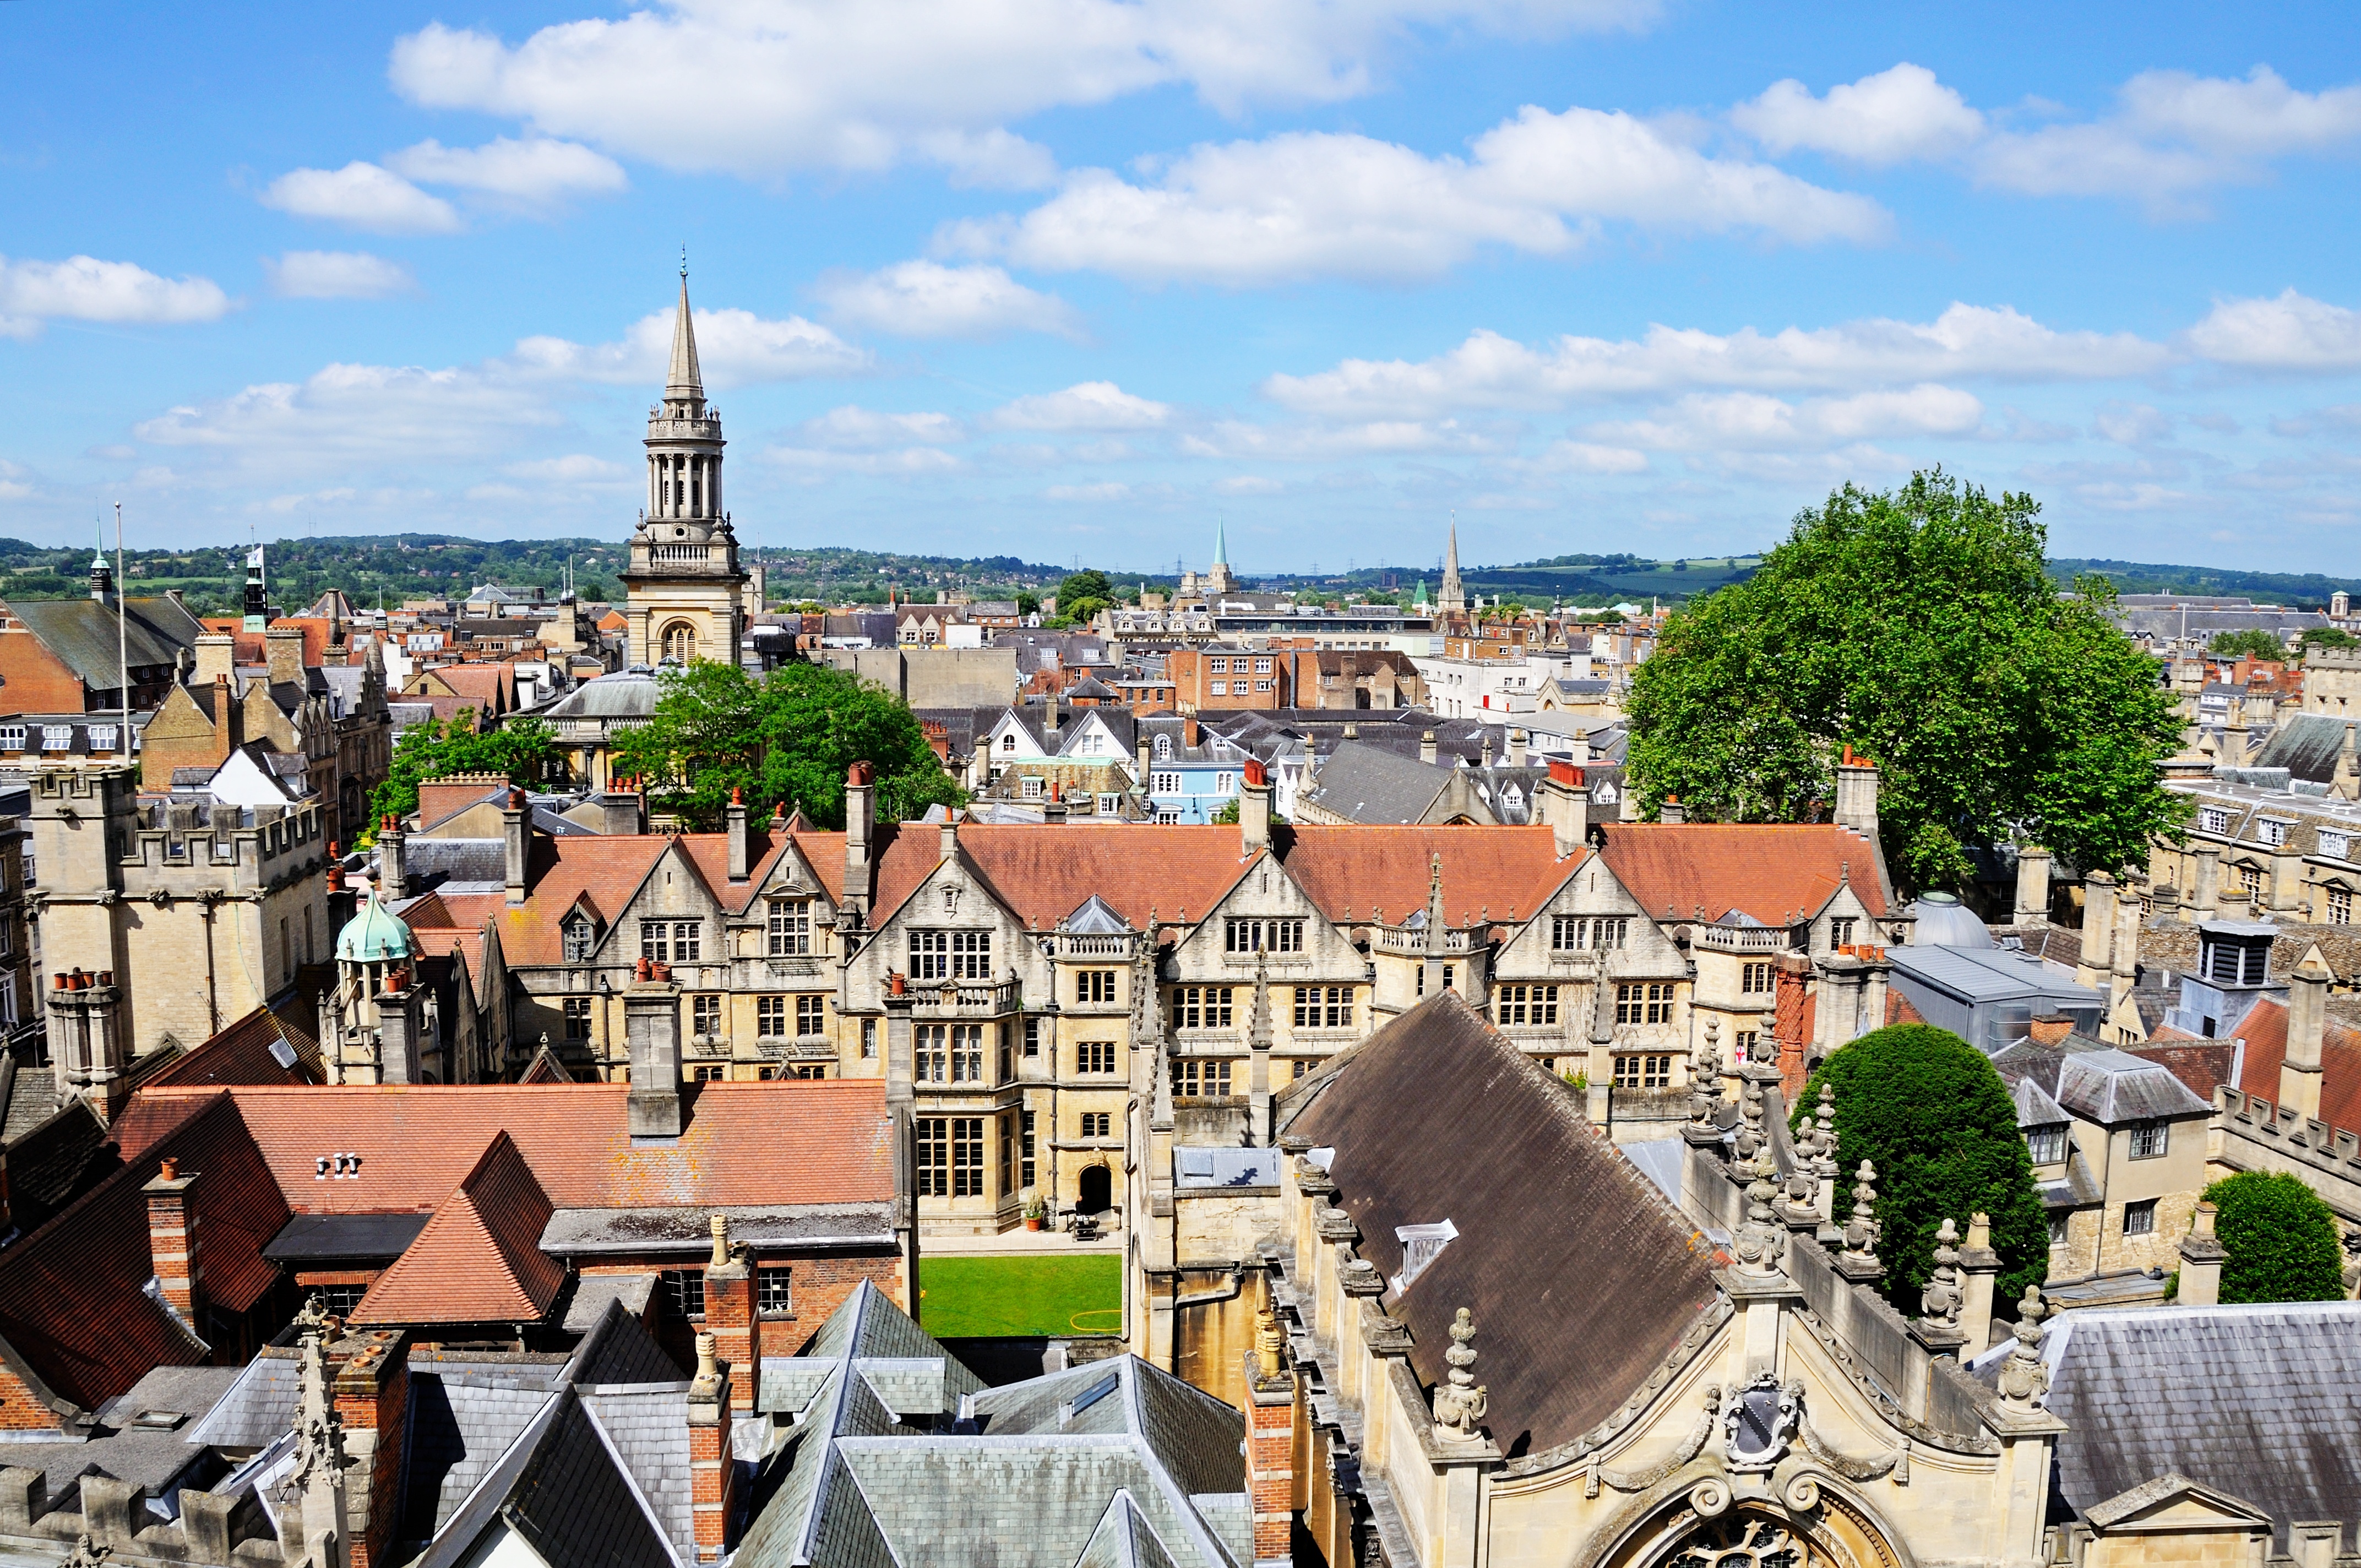 View over the city rooftops from the University church of St Mary spire, Oxford, Oxfordshire, England, UK, Western Europe.